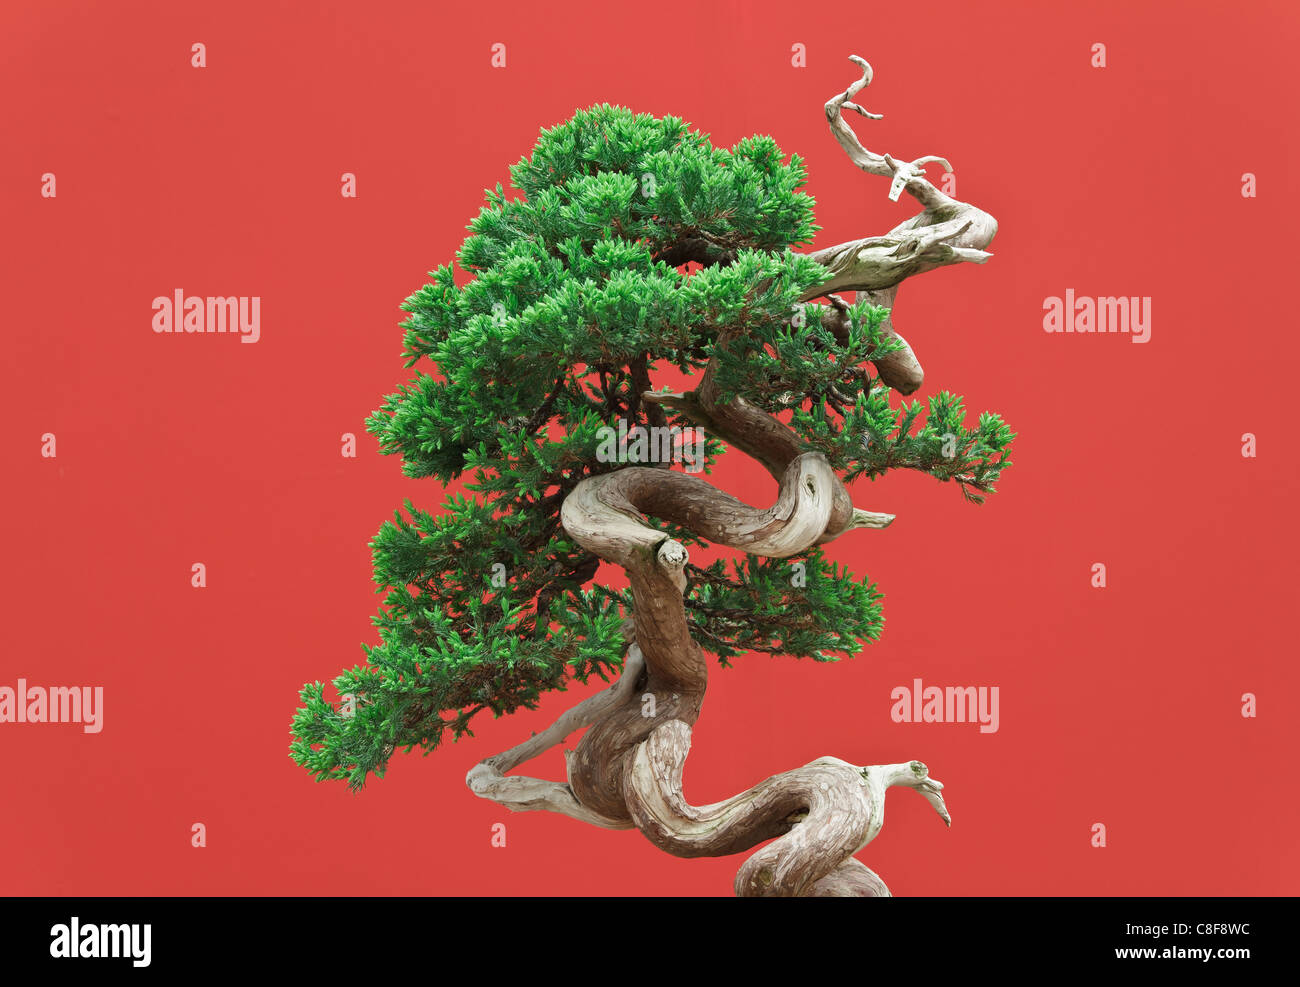 high quality juniper bonsai over red background Stock Photo